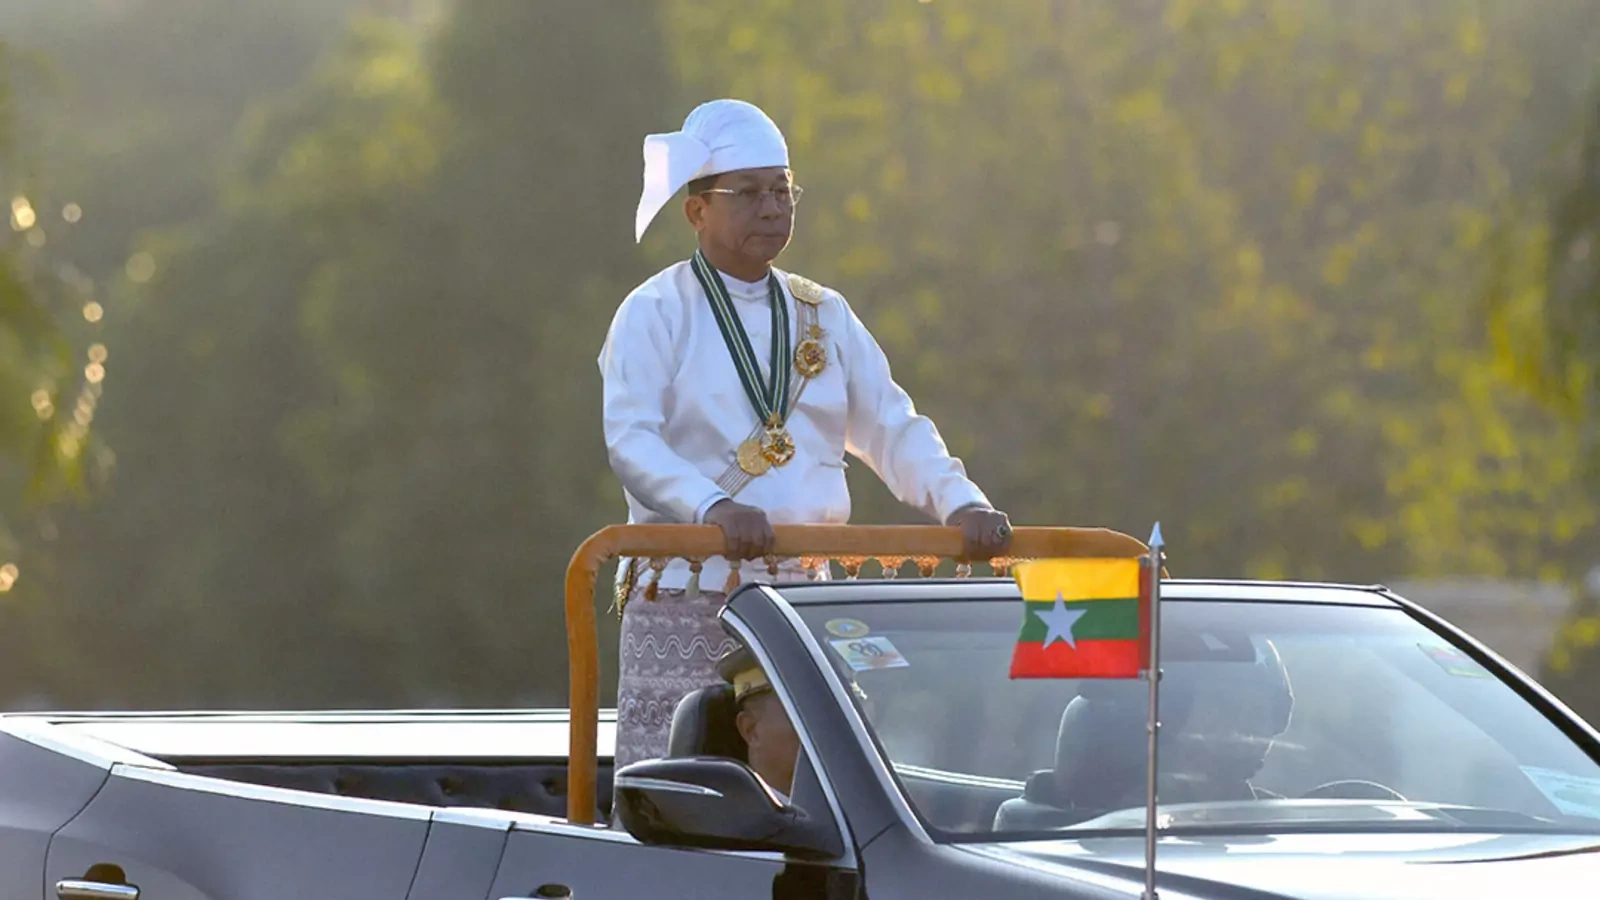 Myanmar's military chief Min Aung Hlaing stands in a car as he oversees a military display at a parade ground to mark the country's Independence Day in Naypyidaw on January 4, 2023.